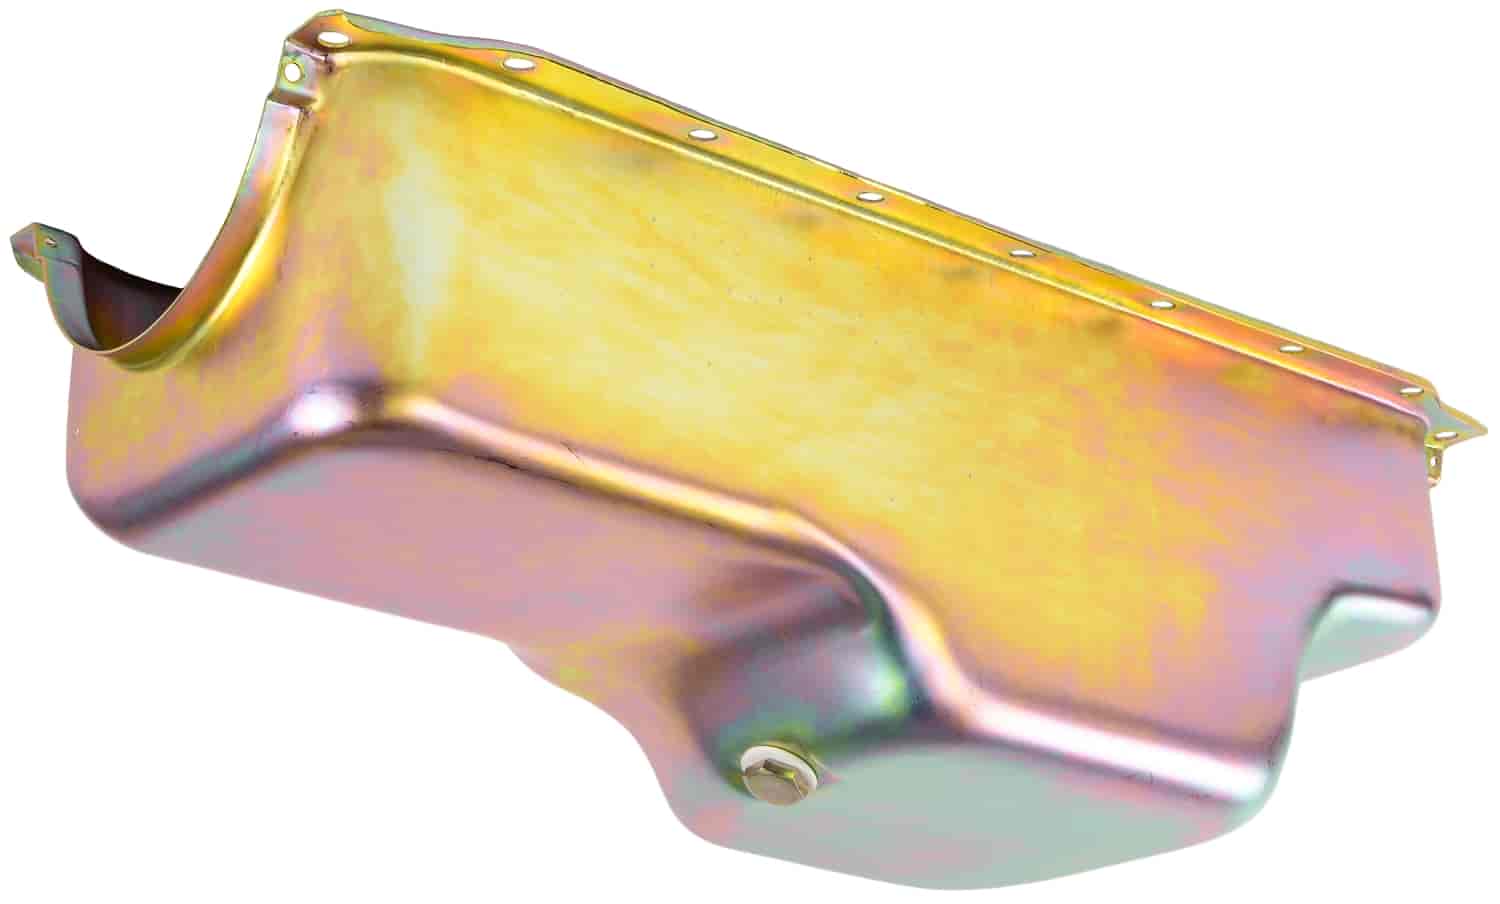 Stock-Style Replacement Oil Pan for 1964-1987 Small Block Chrysler 273-340 [Gold Zinc]